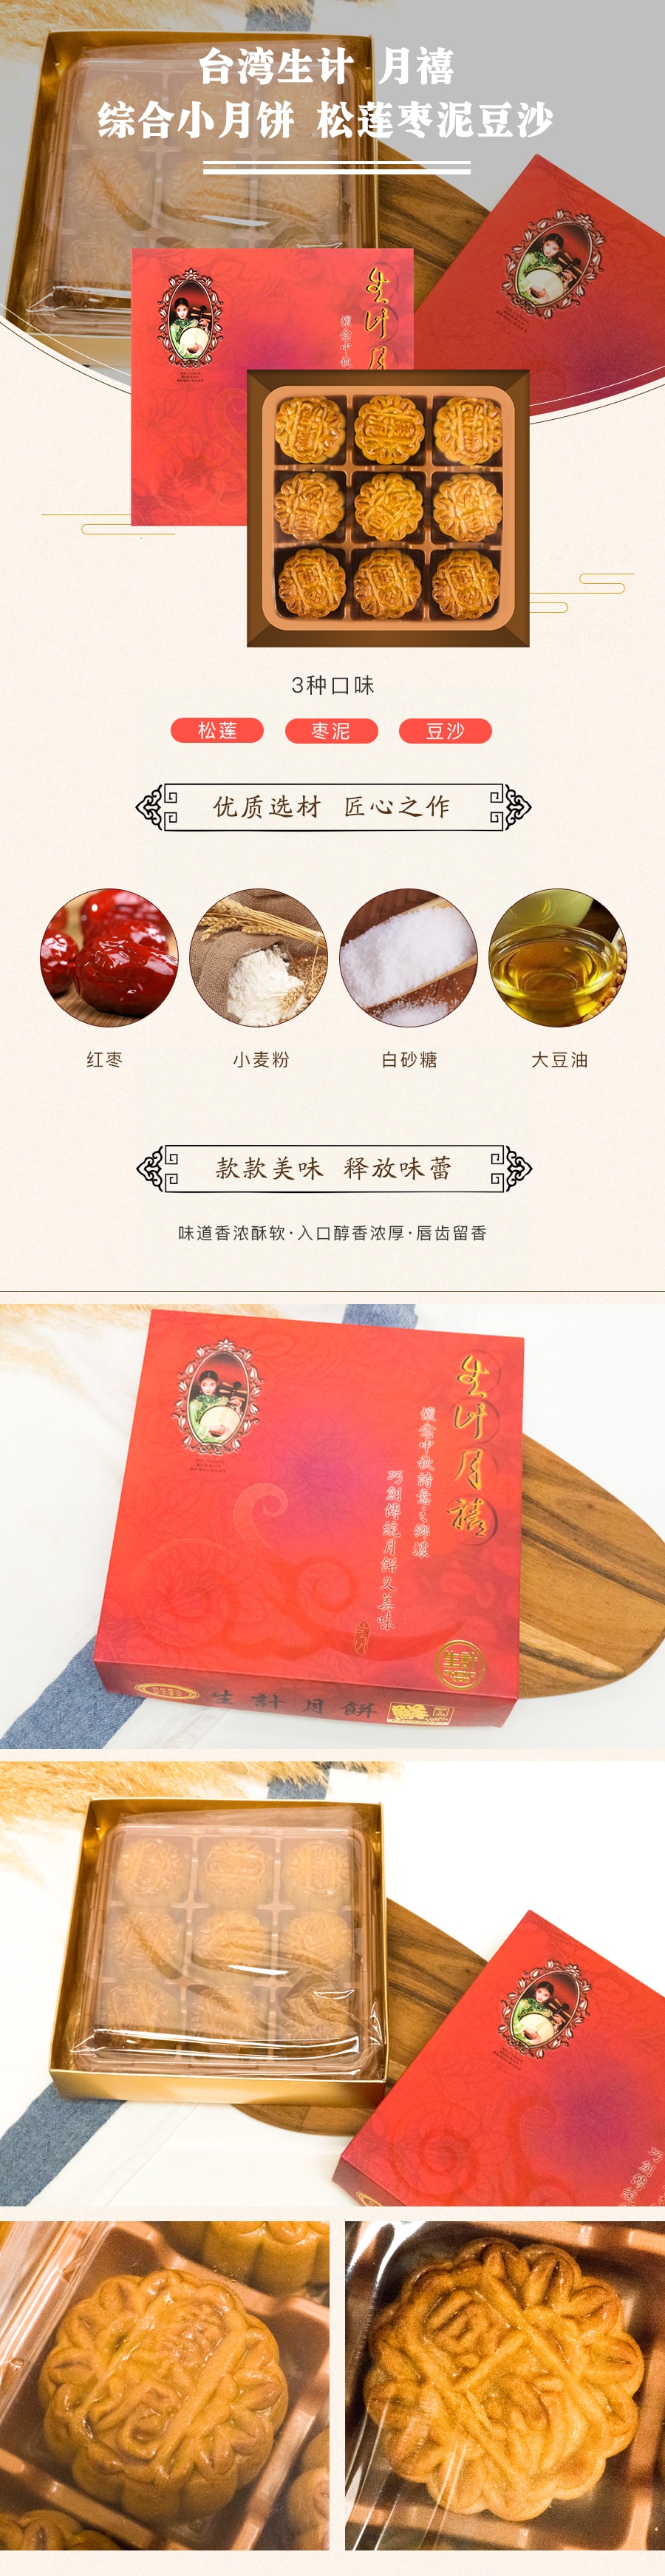 9 Assorted Small Moon Cakes 【Delivery Date: End of August】